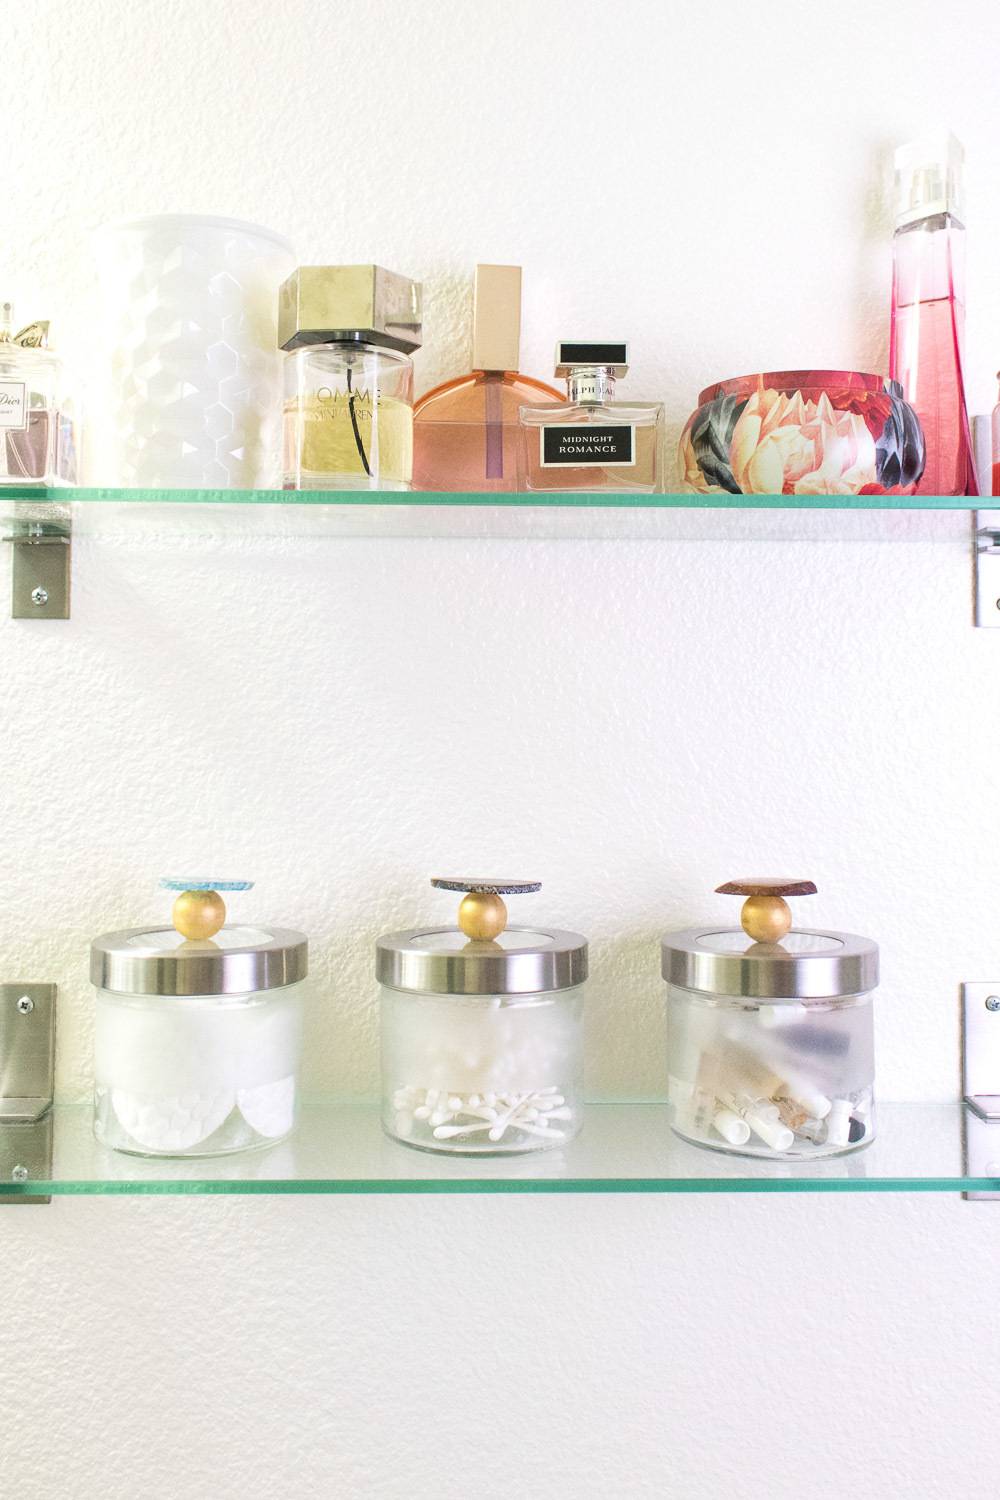 Items and perfumes sit on rows of glass shelves.